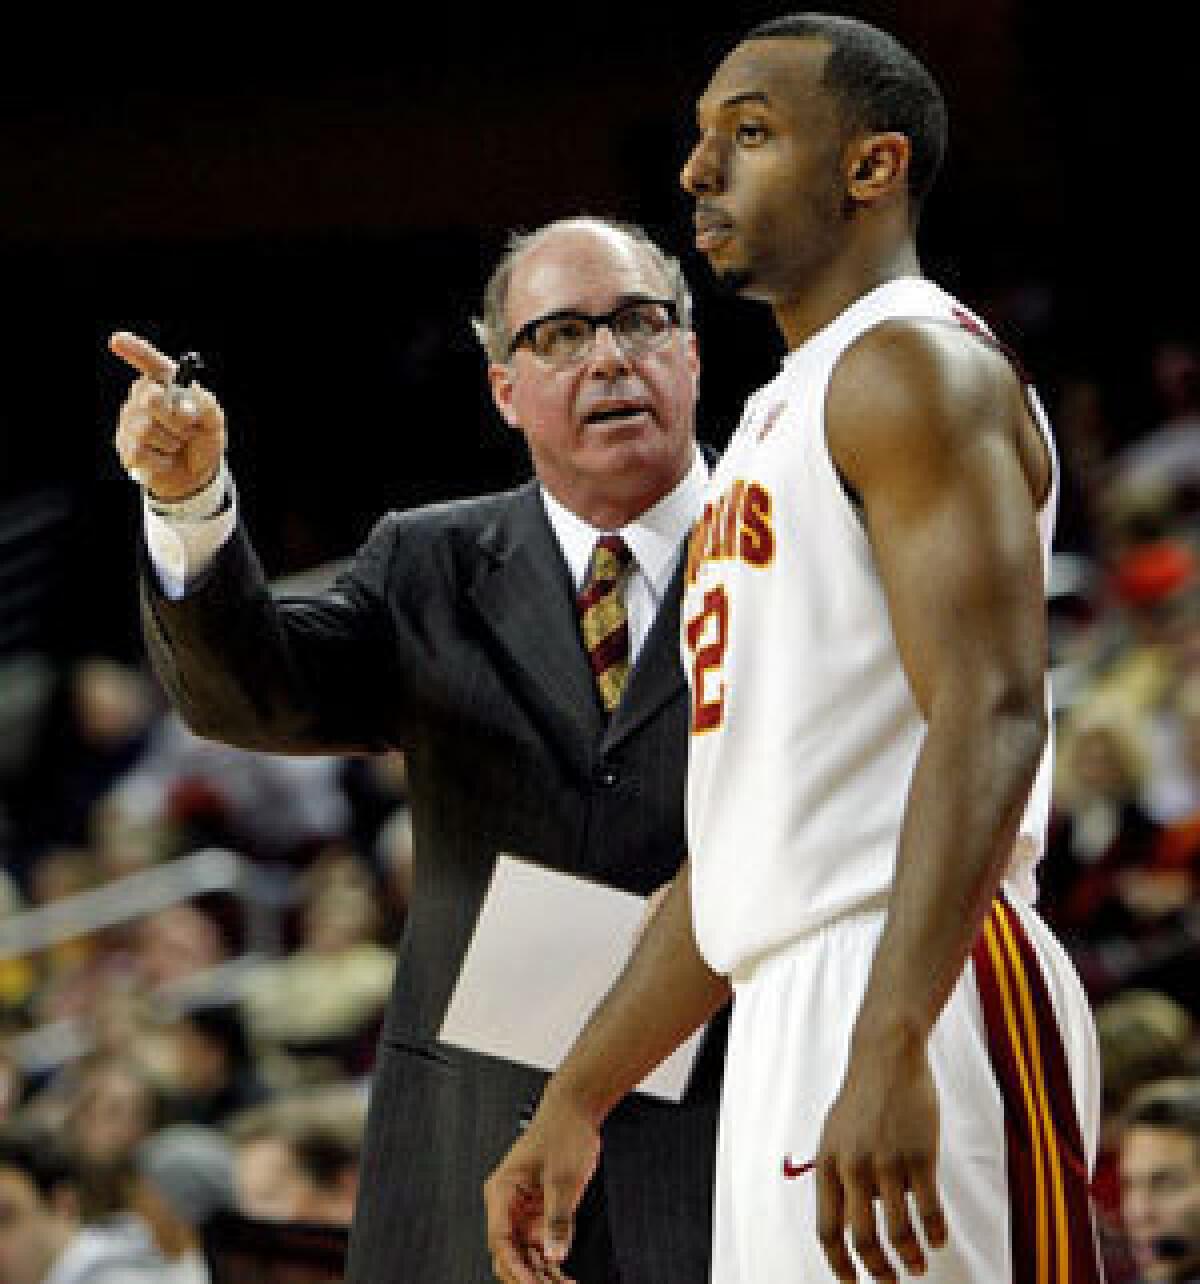 Kevin O'Neill will no longer be giving directions to Byron Wesley or any other Trojans, but he says of coaching at USC: "It's a great basketball job, great."